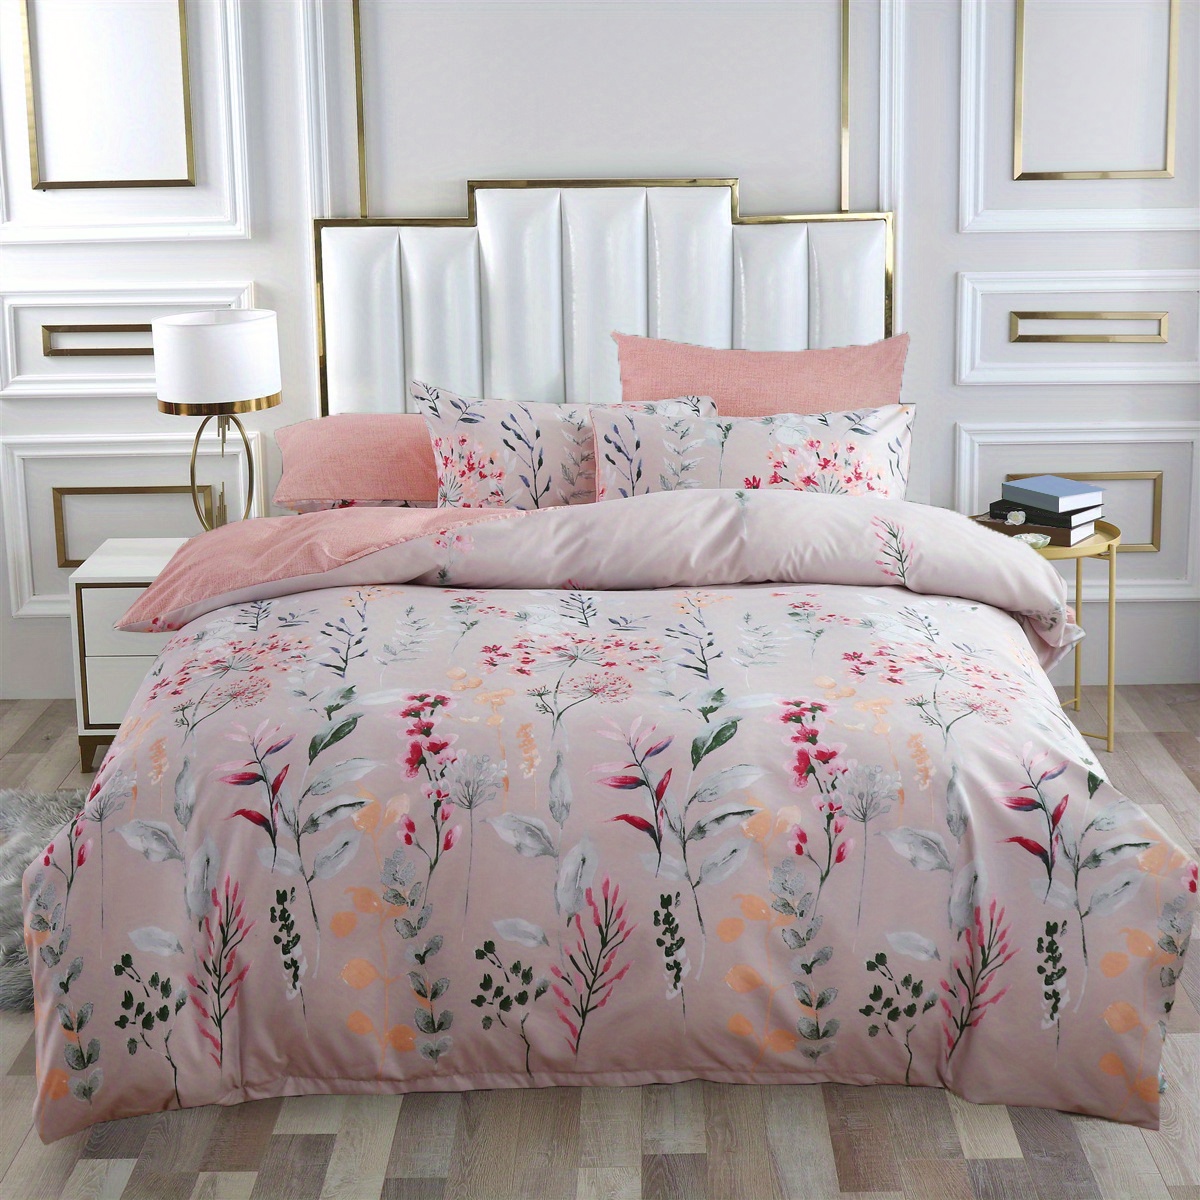 3pcs Soft and Breathable Flower Pattern Duvet Cover Set for Bedroom, Guest Room, and Dorm Decor - Includes 1 Duvet Cover and 2 Pillowcases (Core Not Included)